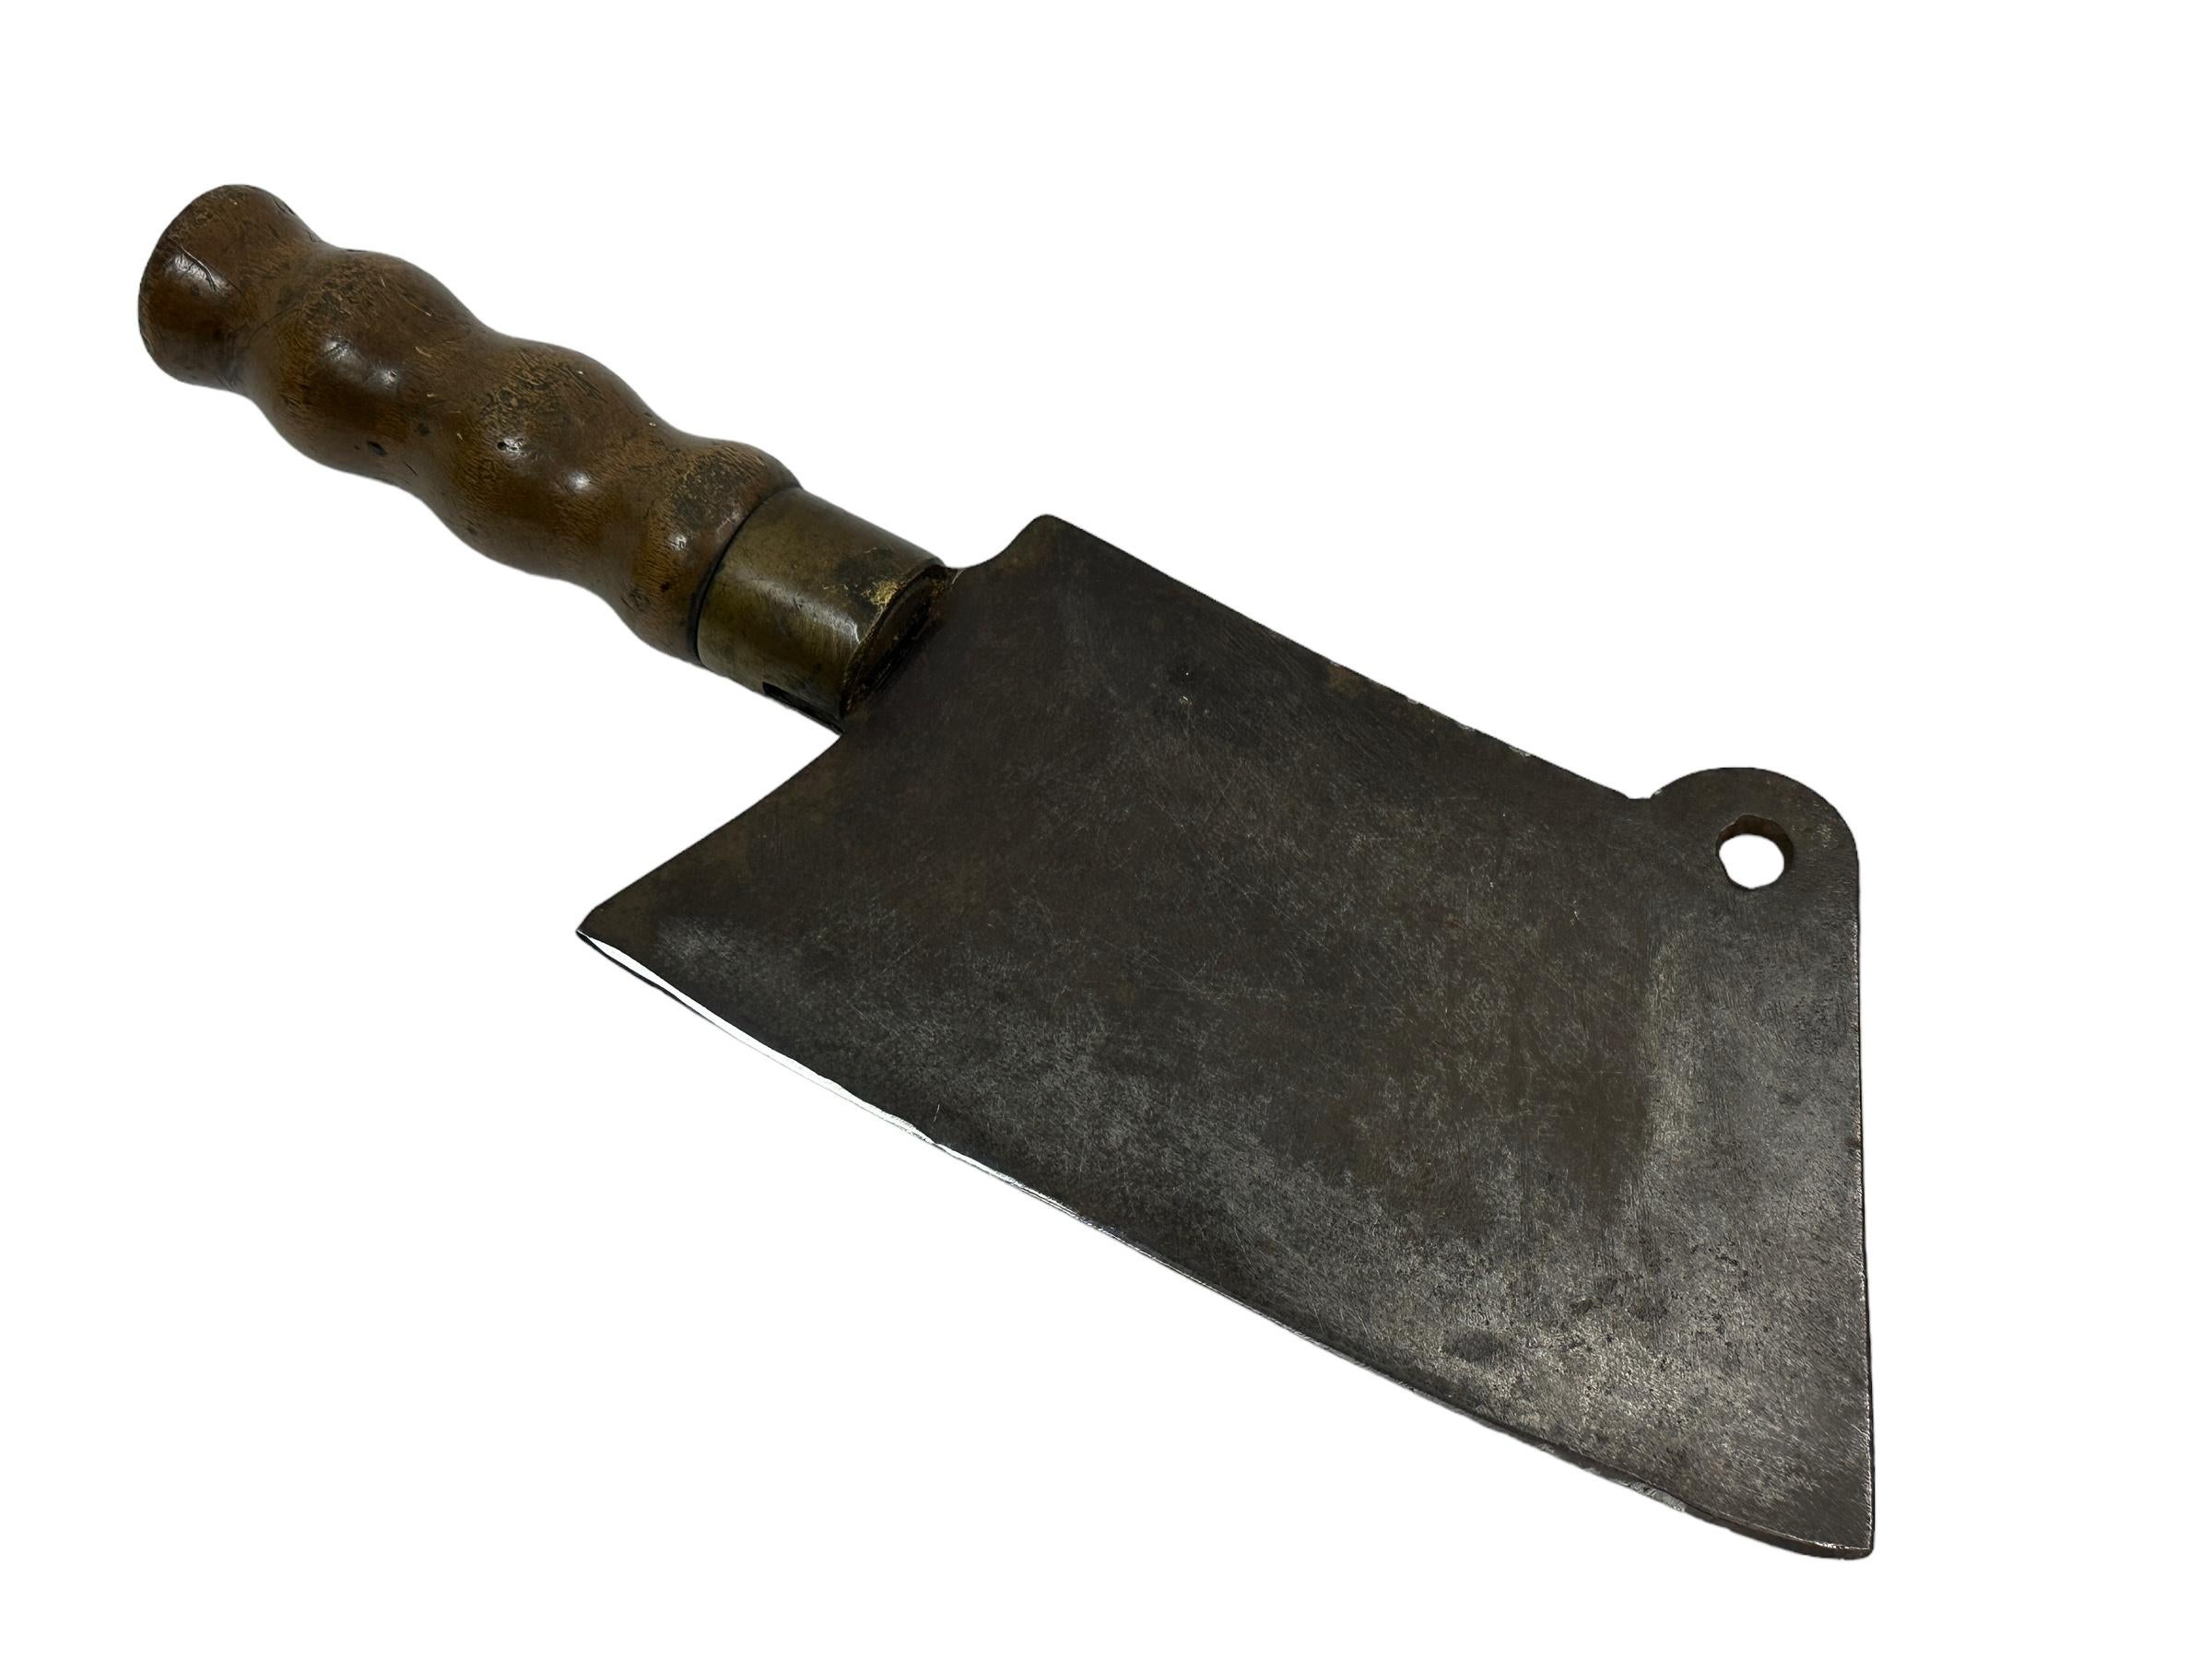 Antique 19th century European cleaver. Made from hand-wrought iron with wood handle. Great as a graphic wall decoration. Found at an estate sale in Nuremberg, Germany. Nice to display with your Butcher Block or to use in your Country Style Kitchen. 